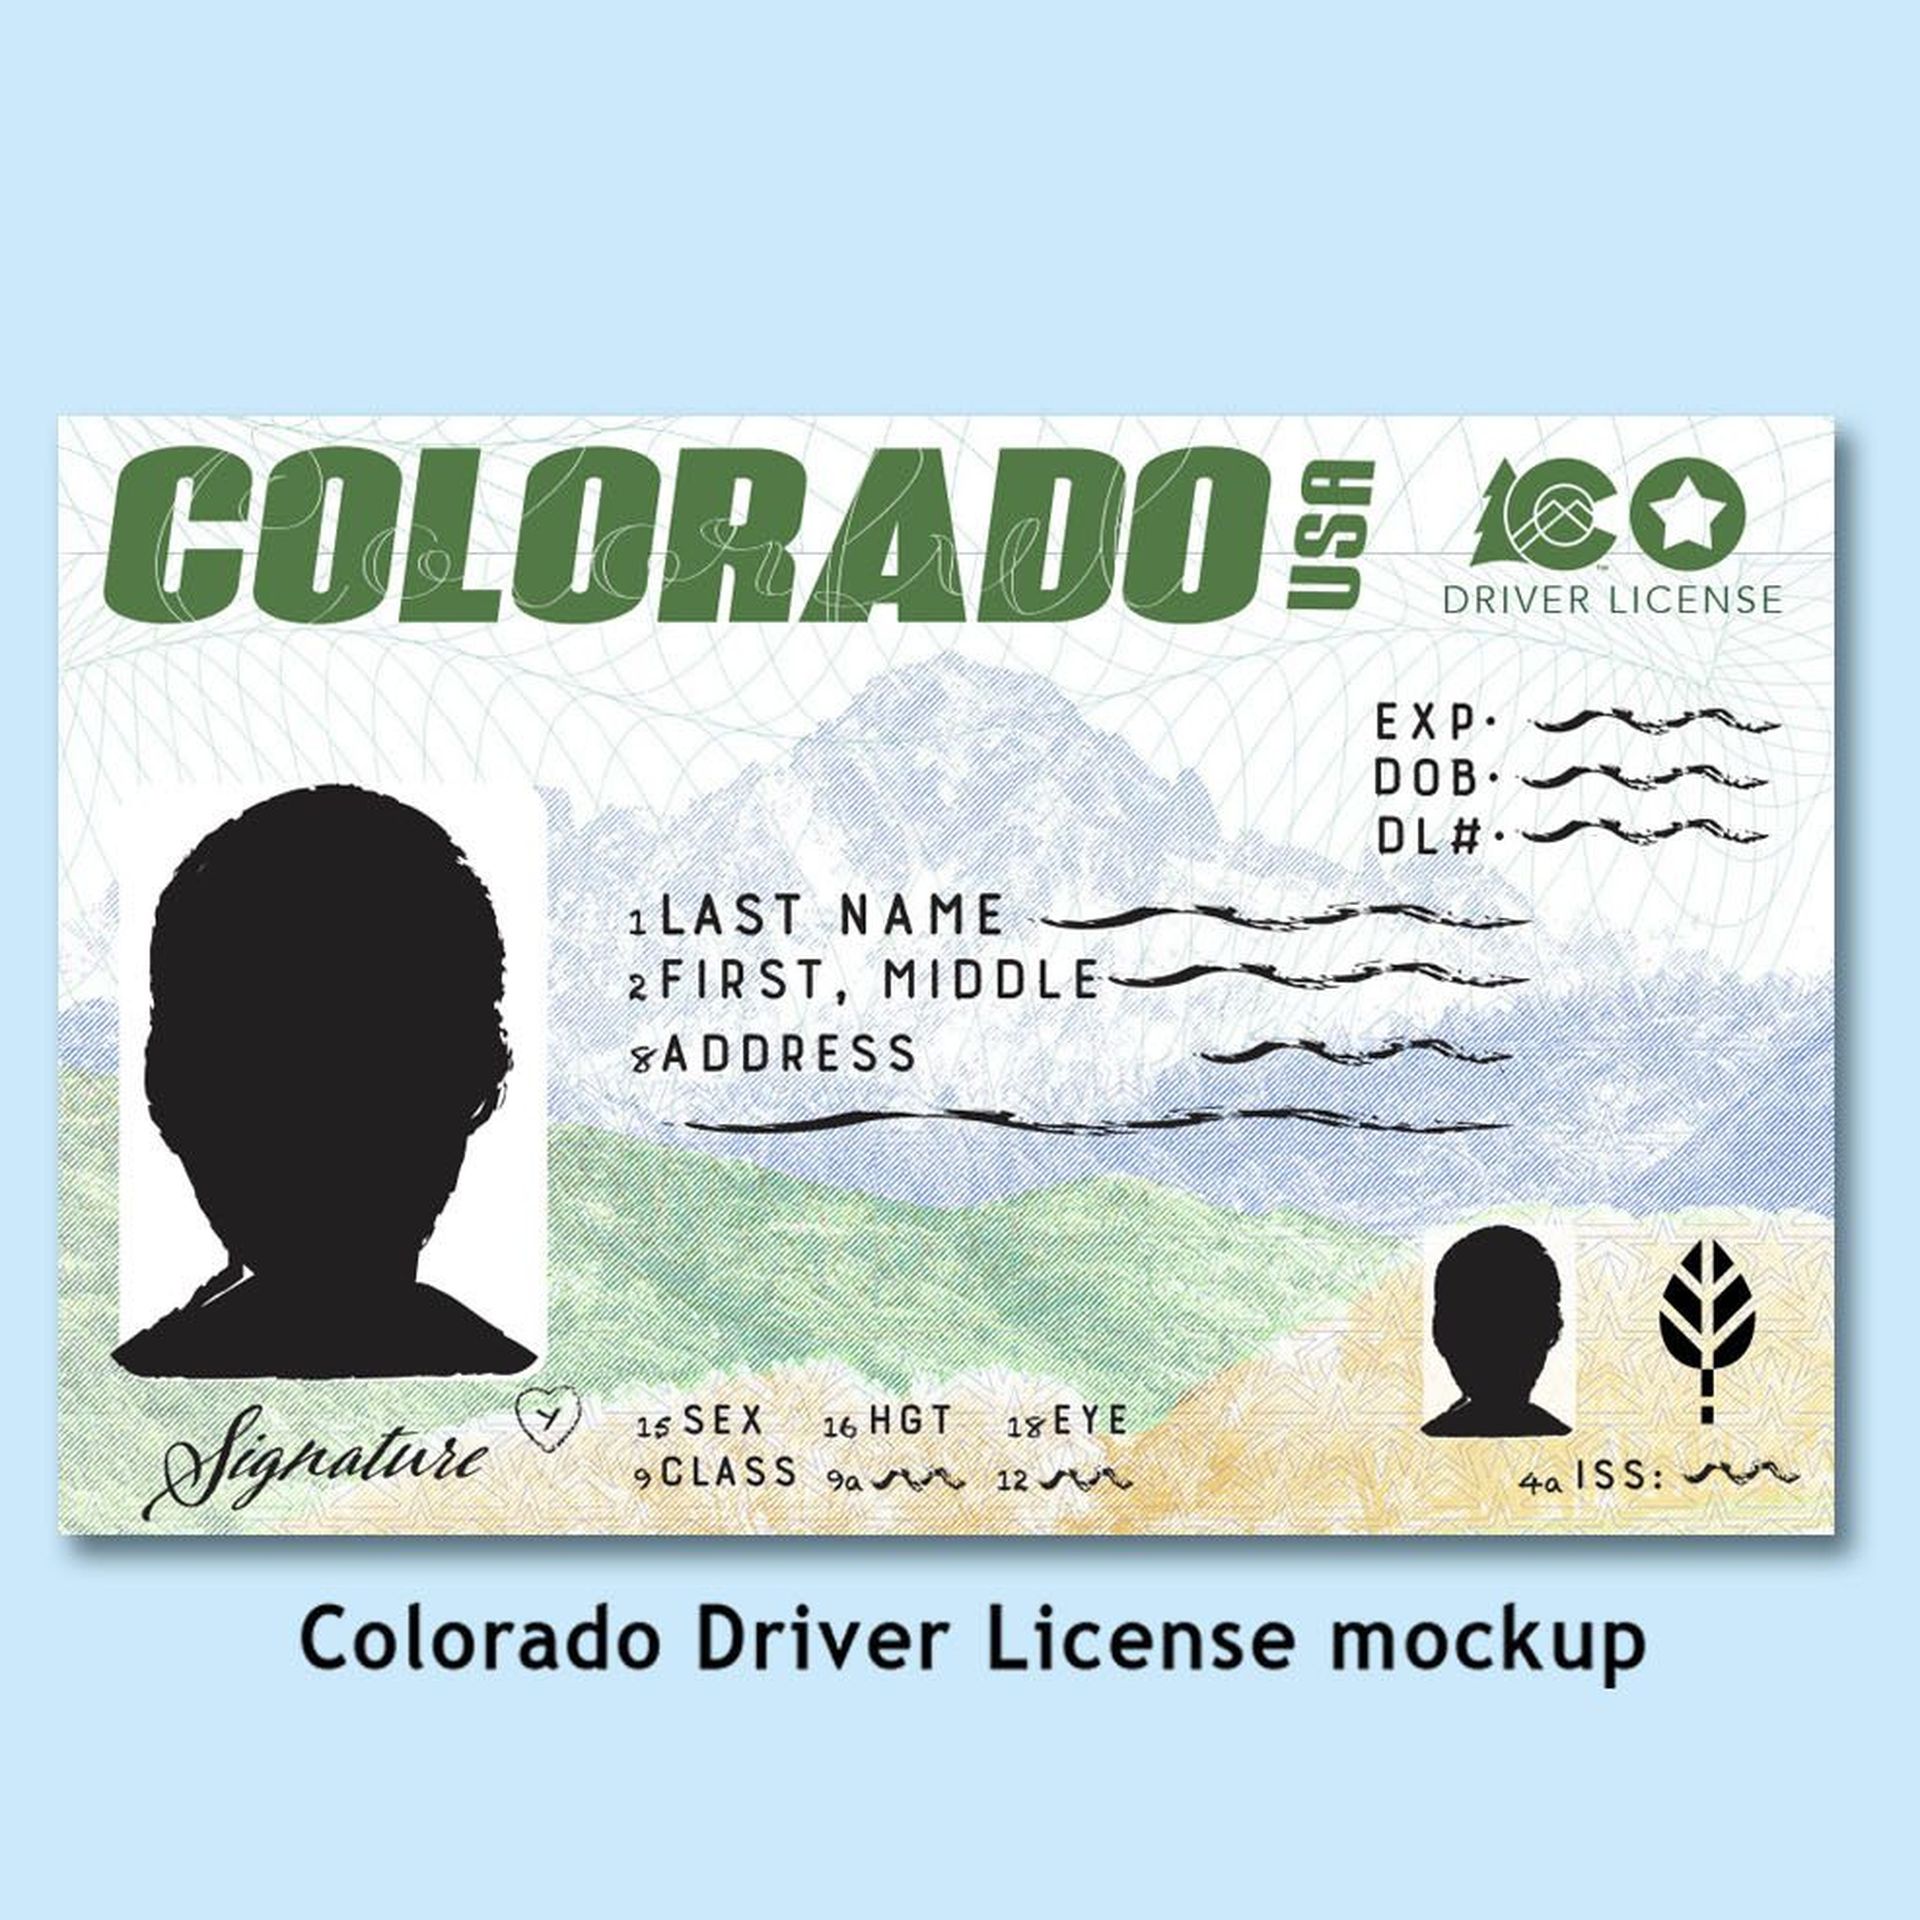 Colorado's new driver license features pictures of Mount Sneffels